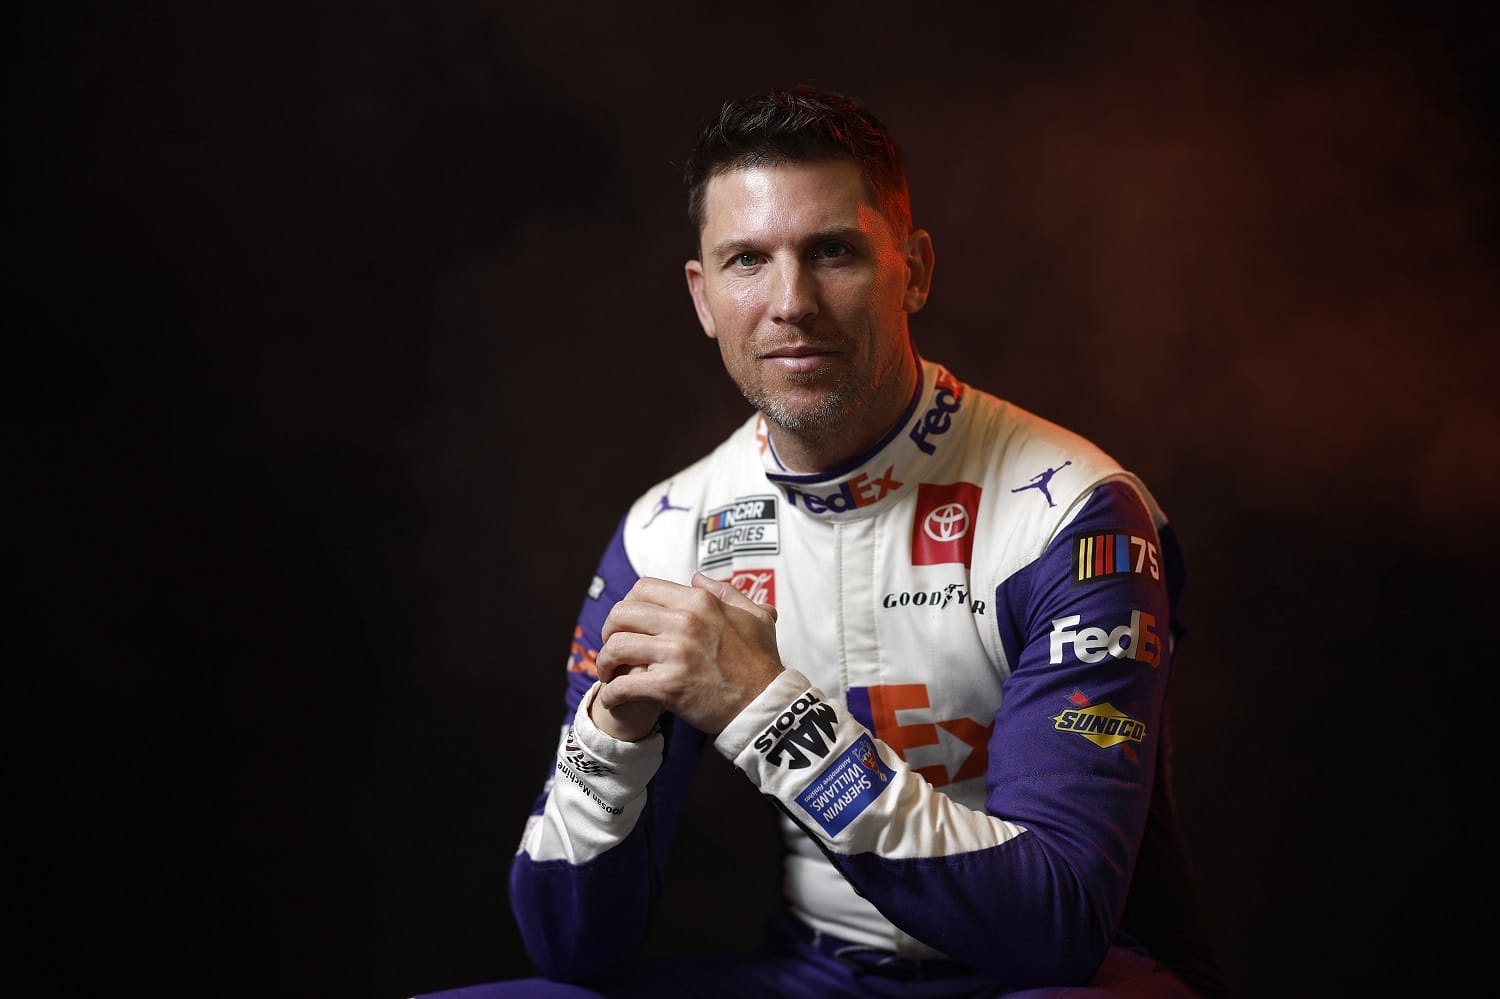 Denny Hamlin poses for a photo during NASCAR Production Days at Charlotte Convention Center on Jan. 18, 2023. | Jared C. Tilton/Getty Images